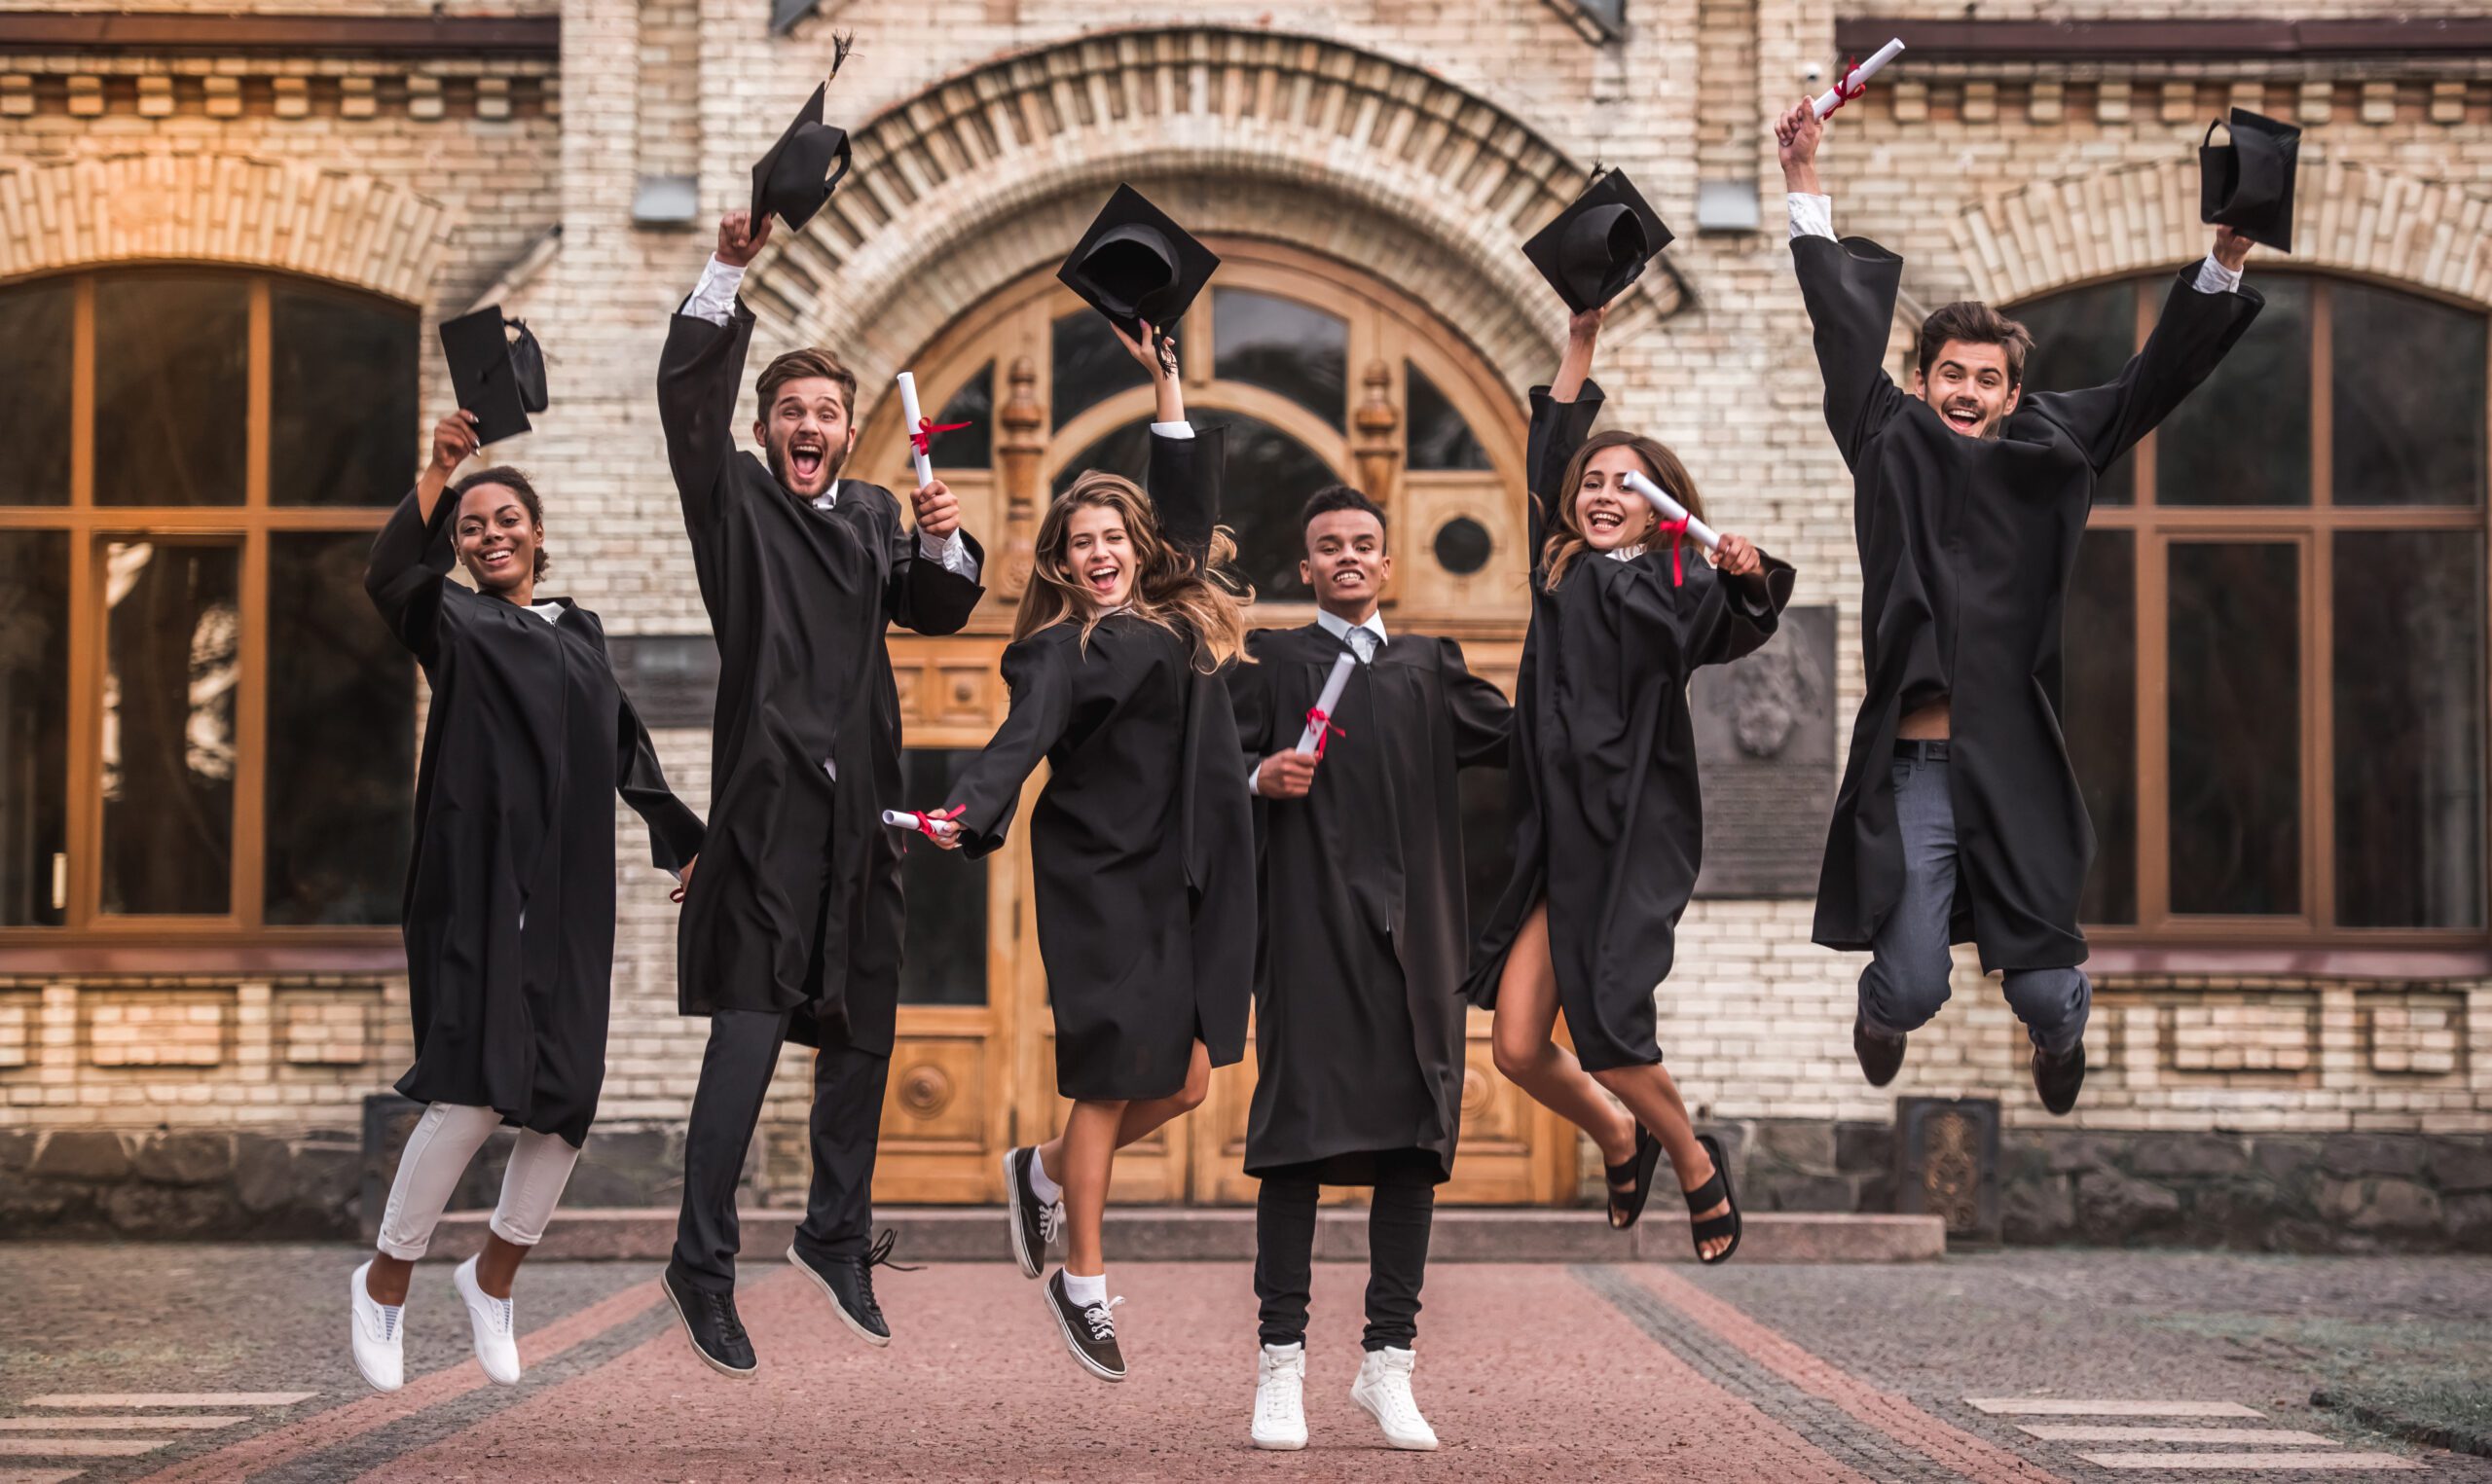 A group of six young people wearing caps and gowns jump in the air to celebrate graduation.